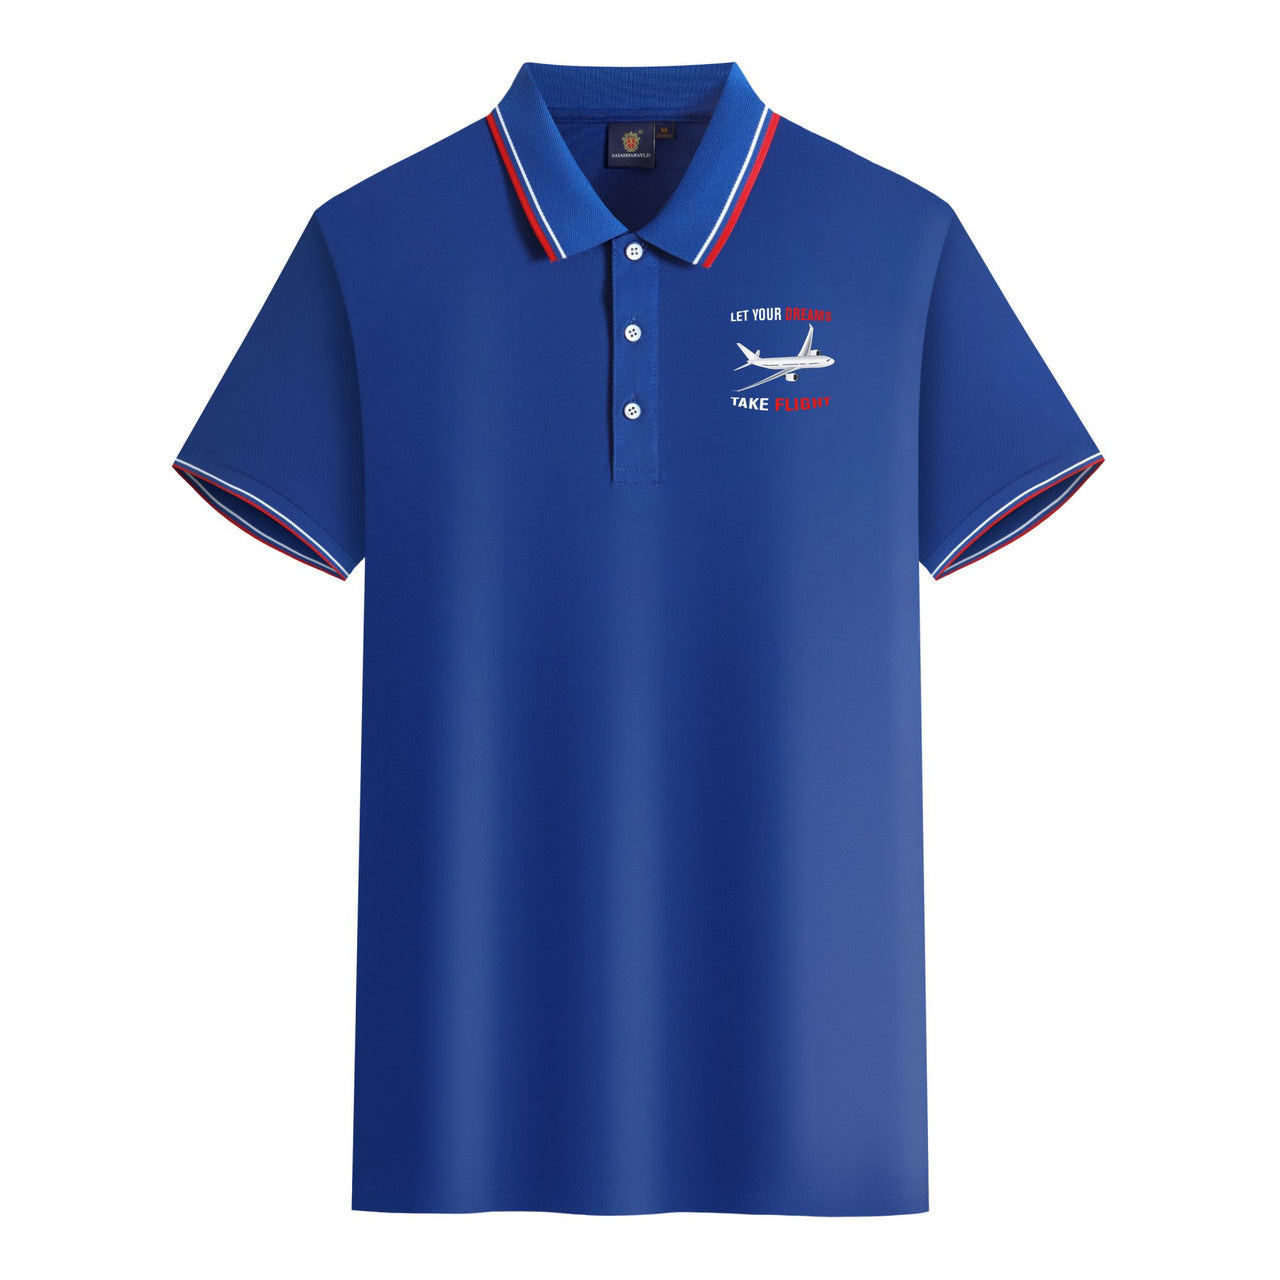 Let Your Dreams Take Flight Designed Stylish Polo T-Shirts